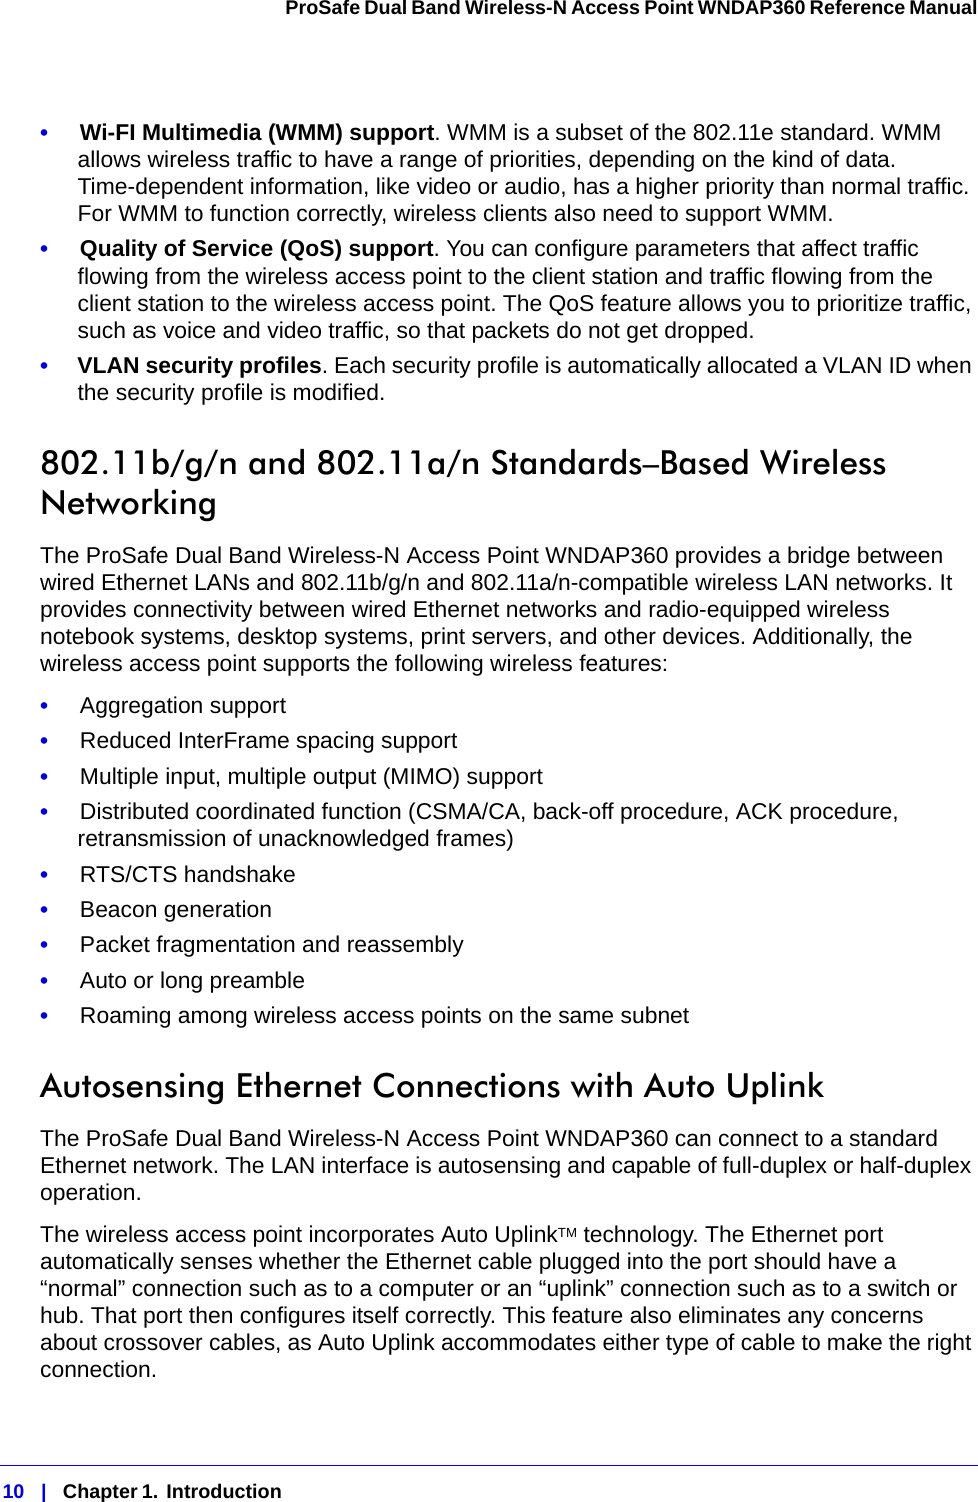 10   |   Chapter 1.  Introduction  ProSafe Dual Band Wireless-N Access Point WNDAP360 Reference Manual •     Wi-FI Multimedia (WMM) support. WMM is a subset of the 802.11e standard. WMM allows wireless traffic to have a range of priorities, depending on the kind of data. Time-dependent information, like video or audio, has a higher priority than normal traffic. For WMM to function correctly, wireless clients also need to support WMM. •     Quality of Service (QoS) support. You can configure parameters that affect traffic flowing from the wireless access point to the client station and traffic flowing from the client station to the wireless access point. The QoS feature allows you to prioritize traffic, such as voice and video traffic, so that packets do not get dropped.•     VLAN security profiles. Each security profile is automatically allocated a VLAN ID when the security profile is modified.802.11b/g/n and 802.11a/n Standards–Based Wireless NetworkingThe ProSafe Dual Band Wireless-N Access Point WNDAP360 provides a bridge between wired Ethernet LANs and 802.11b/g/n and 802.11a/n-compatible wireless LAN networks. It provides connectivity between wired Ethernet networks and radio-equipped wireless notebook systems, desktop systems, print servers, and other devices. Additionally, the wireless access point supports the following wireless features:•     Aggregation support•     Reduced InterFrame spacing support•     Multiple input, multiple output (MIMO) support•     Distributed coordinated function (CSMA/CA, back-off procedure, ACK procedure, retransmission of unacknowledged frames)•     RTS/CTS handshake•     Beacon generation•     Packet fragmentation and reassembly•     Auto or long preamble•     Roaming among wireless access points on the same subnetAutosensing Ethernet Connections with Auto Uplink The ProSafe Dual Band Wireless-N Access Point WNDAP360 can connect to a standard Ethernet network. The LAN interface is autosensing and capable of full-duplex or half-duplex operation. The wireless access point incorporates Auto UplinkTM technology. The Ethernet port automatically senses whether the Ethernet cable plugged into the port should have a “normal” connection such as to a computer or an “uplink” connection such as to a switch or hub. That port then configures itself correctly. This feature also eliminates any concerns about crossover cables, as Auto Uplink accommodates either type of cable to make the right connection.